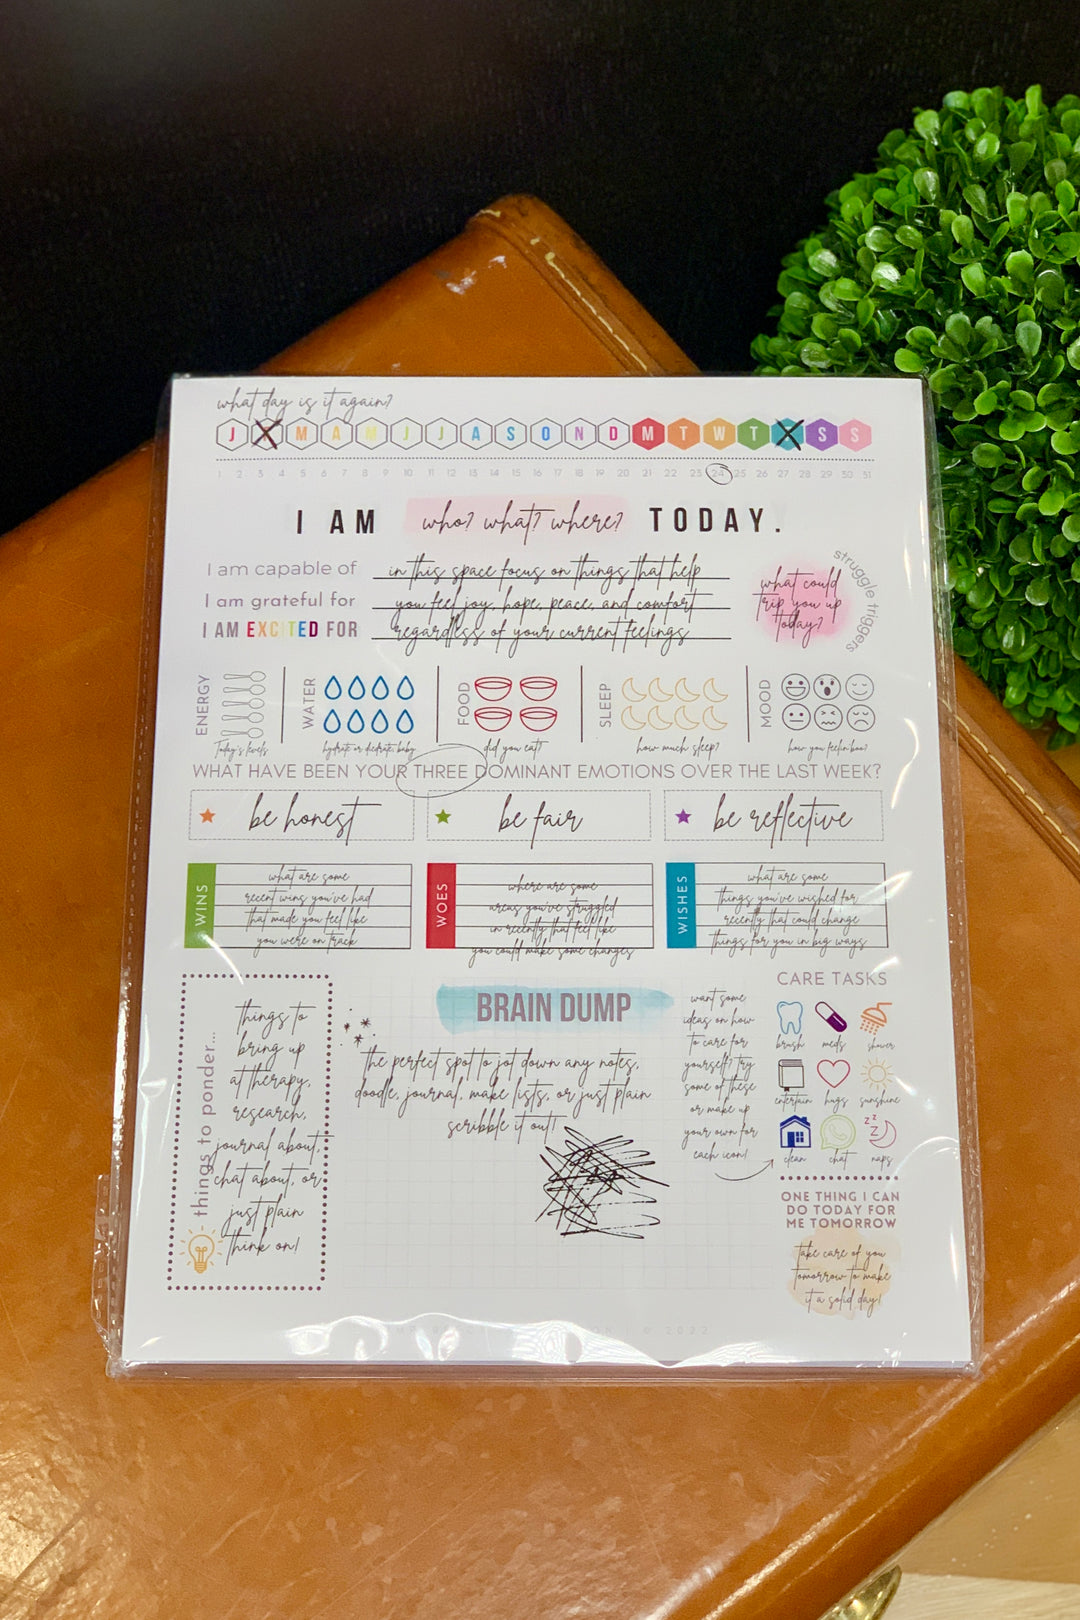 Self Care Notepad Planner